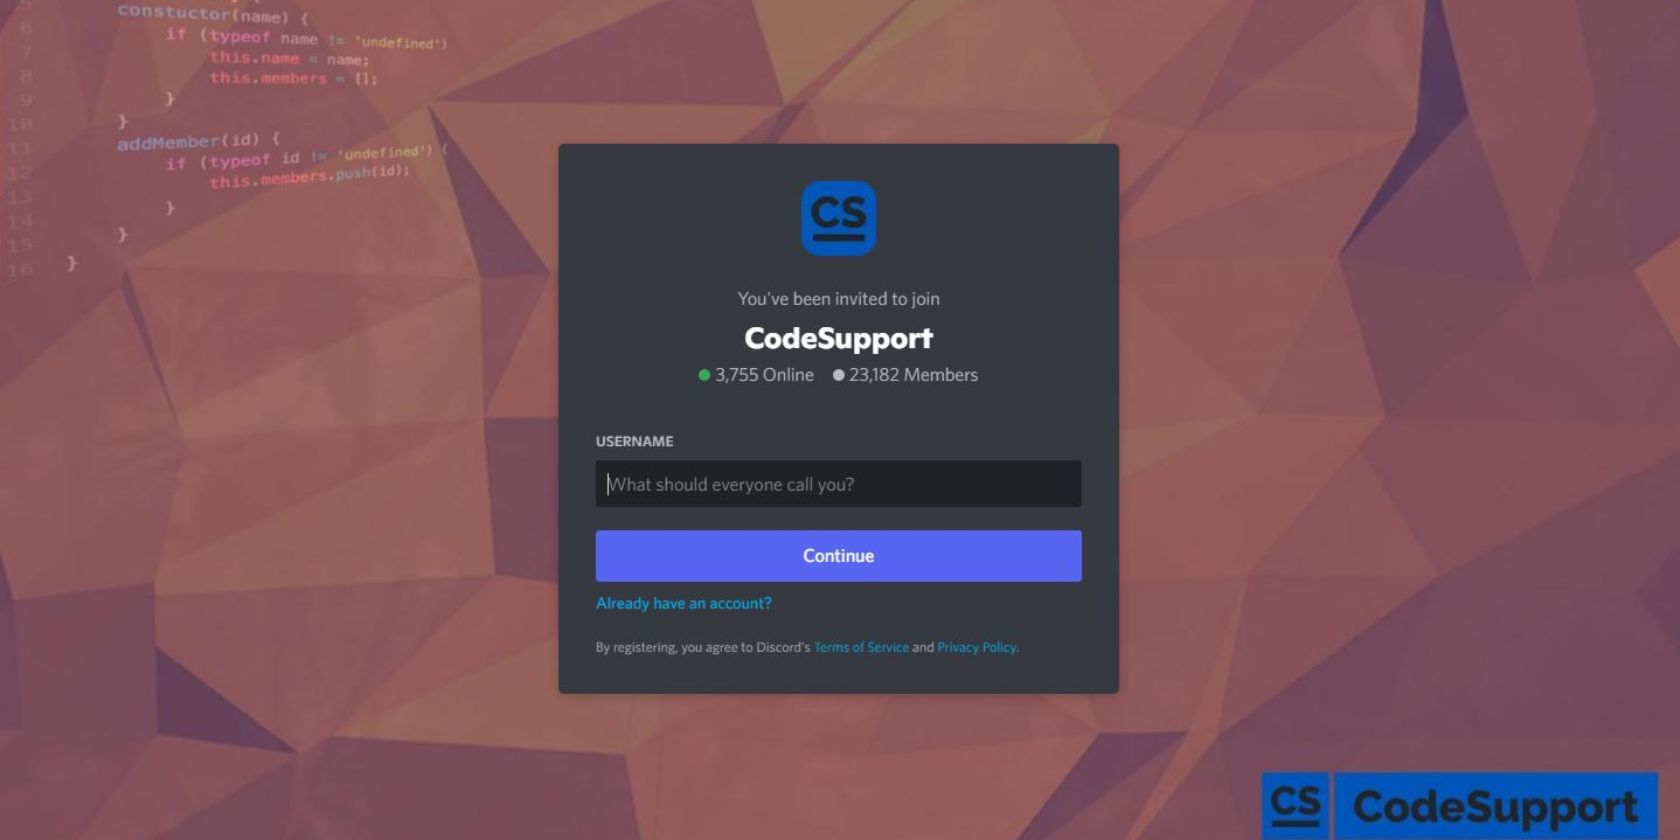 A screenshot of CodeSupport's invite page